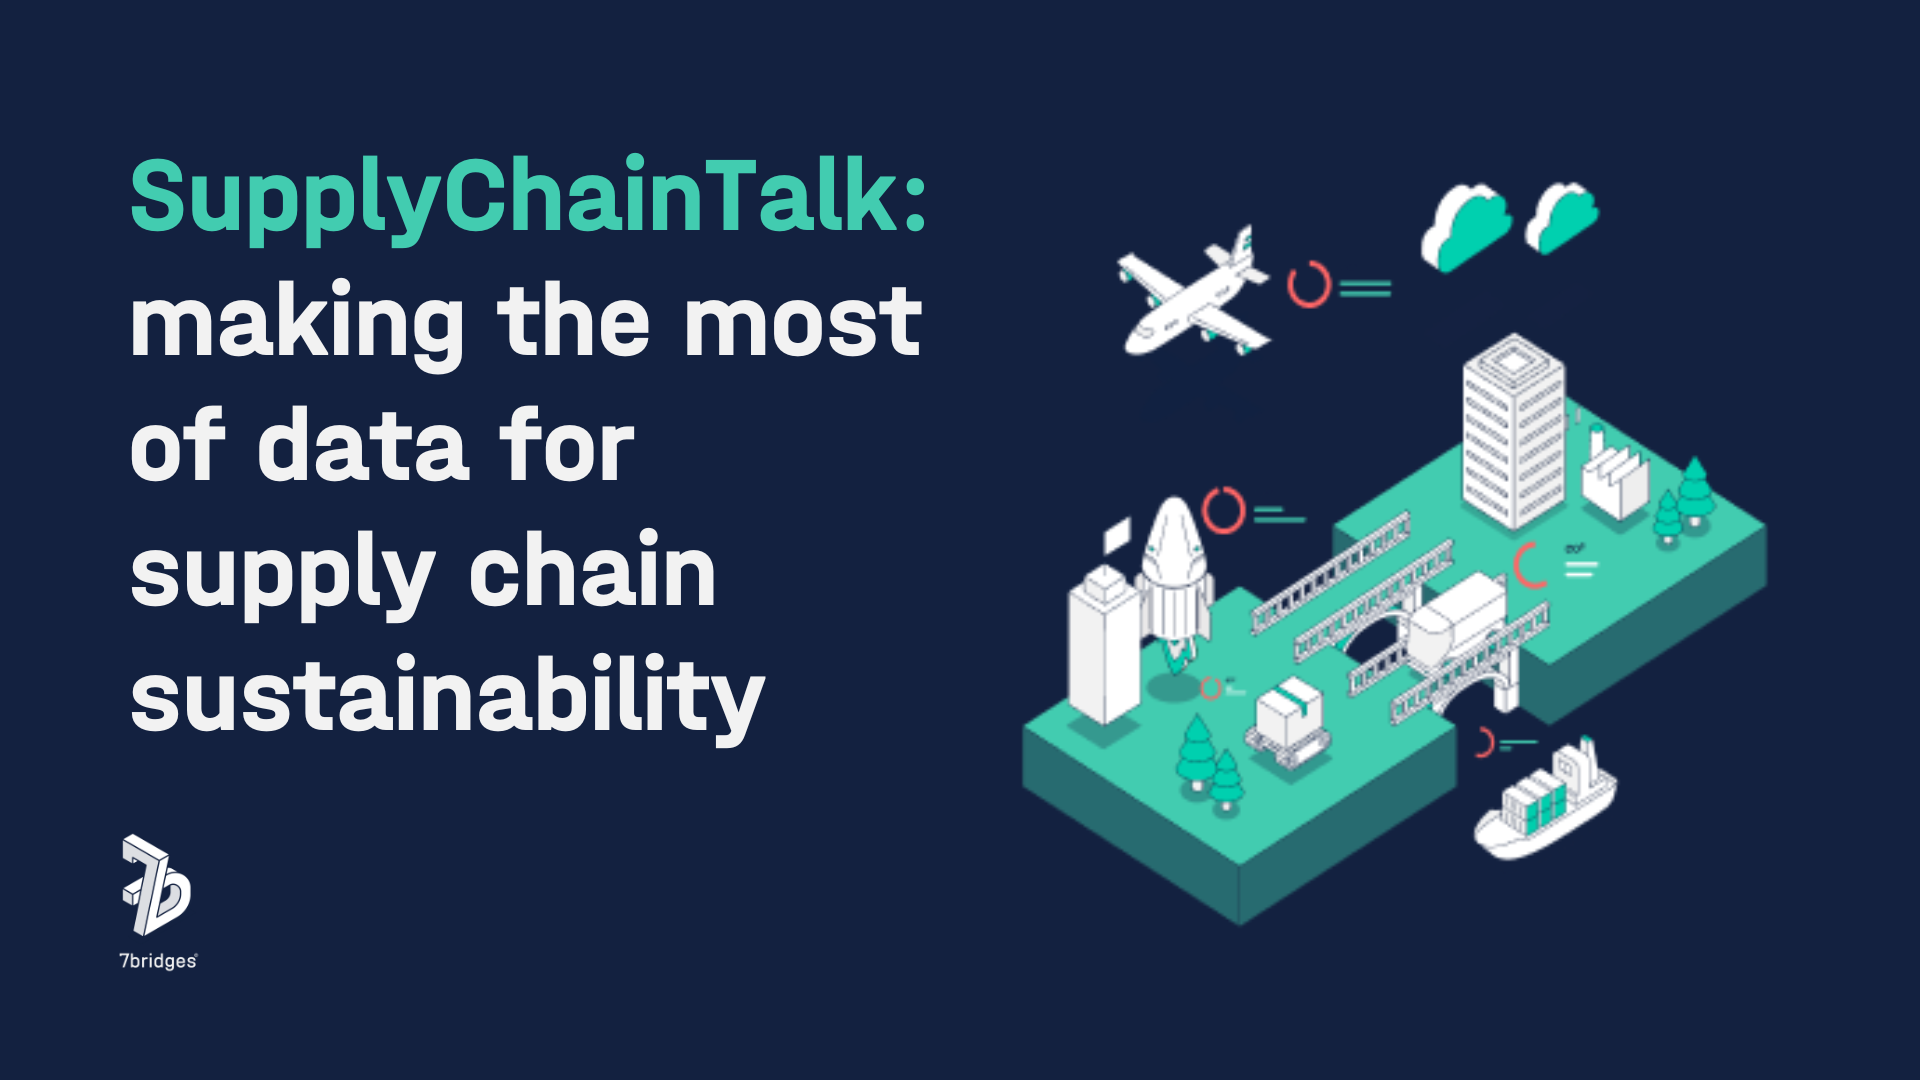 SupplyChainTalk: making the most of data for supply chain sustainability on dark blue background